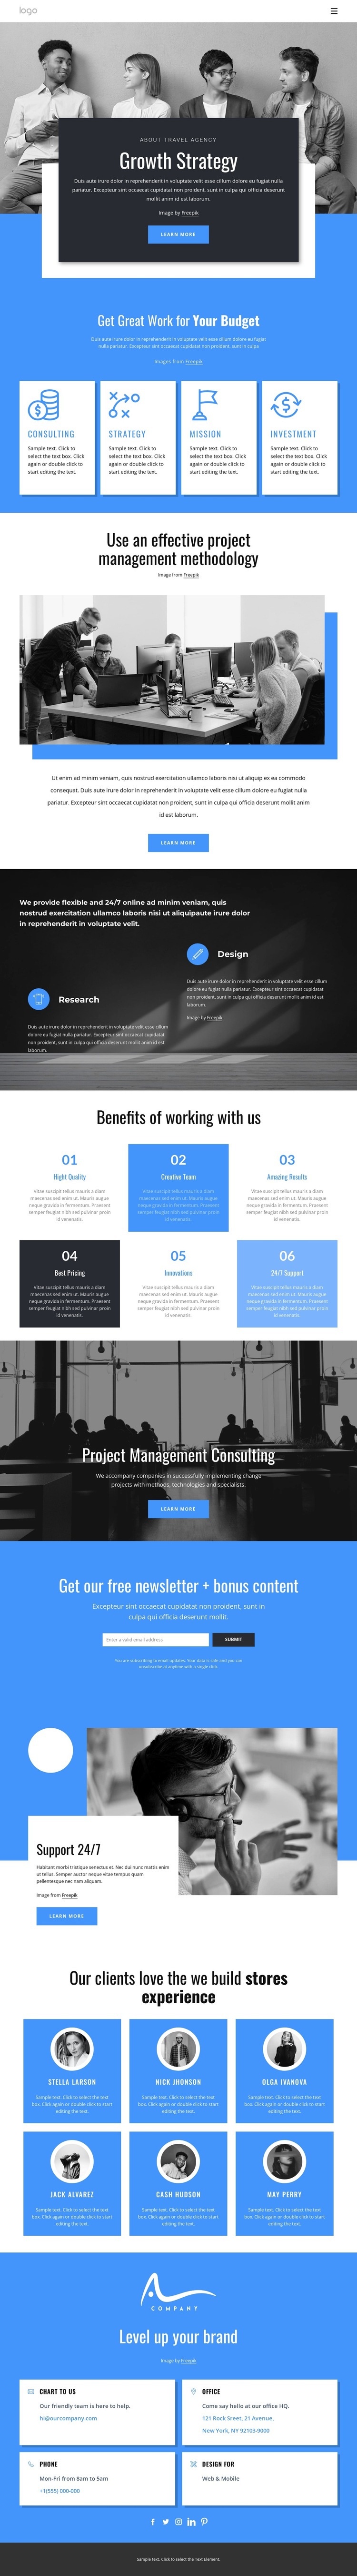 Growth strategy consulting company Homepage Design